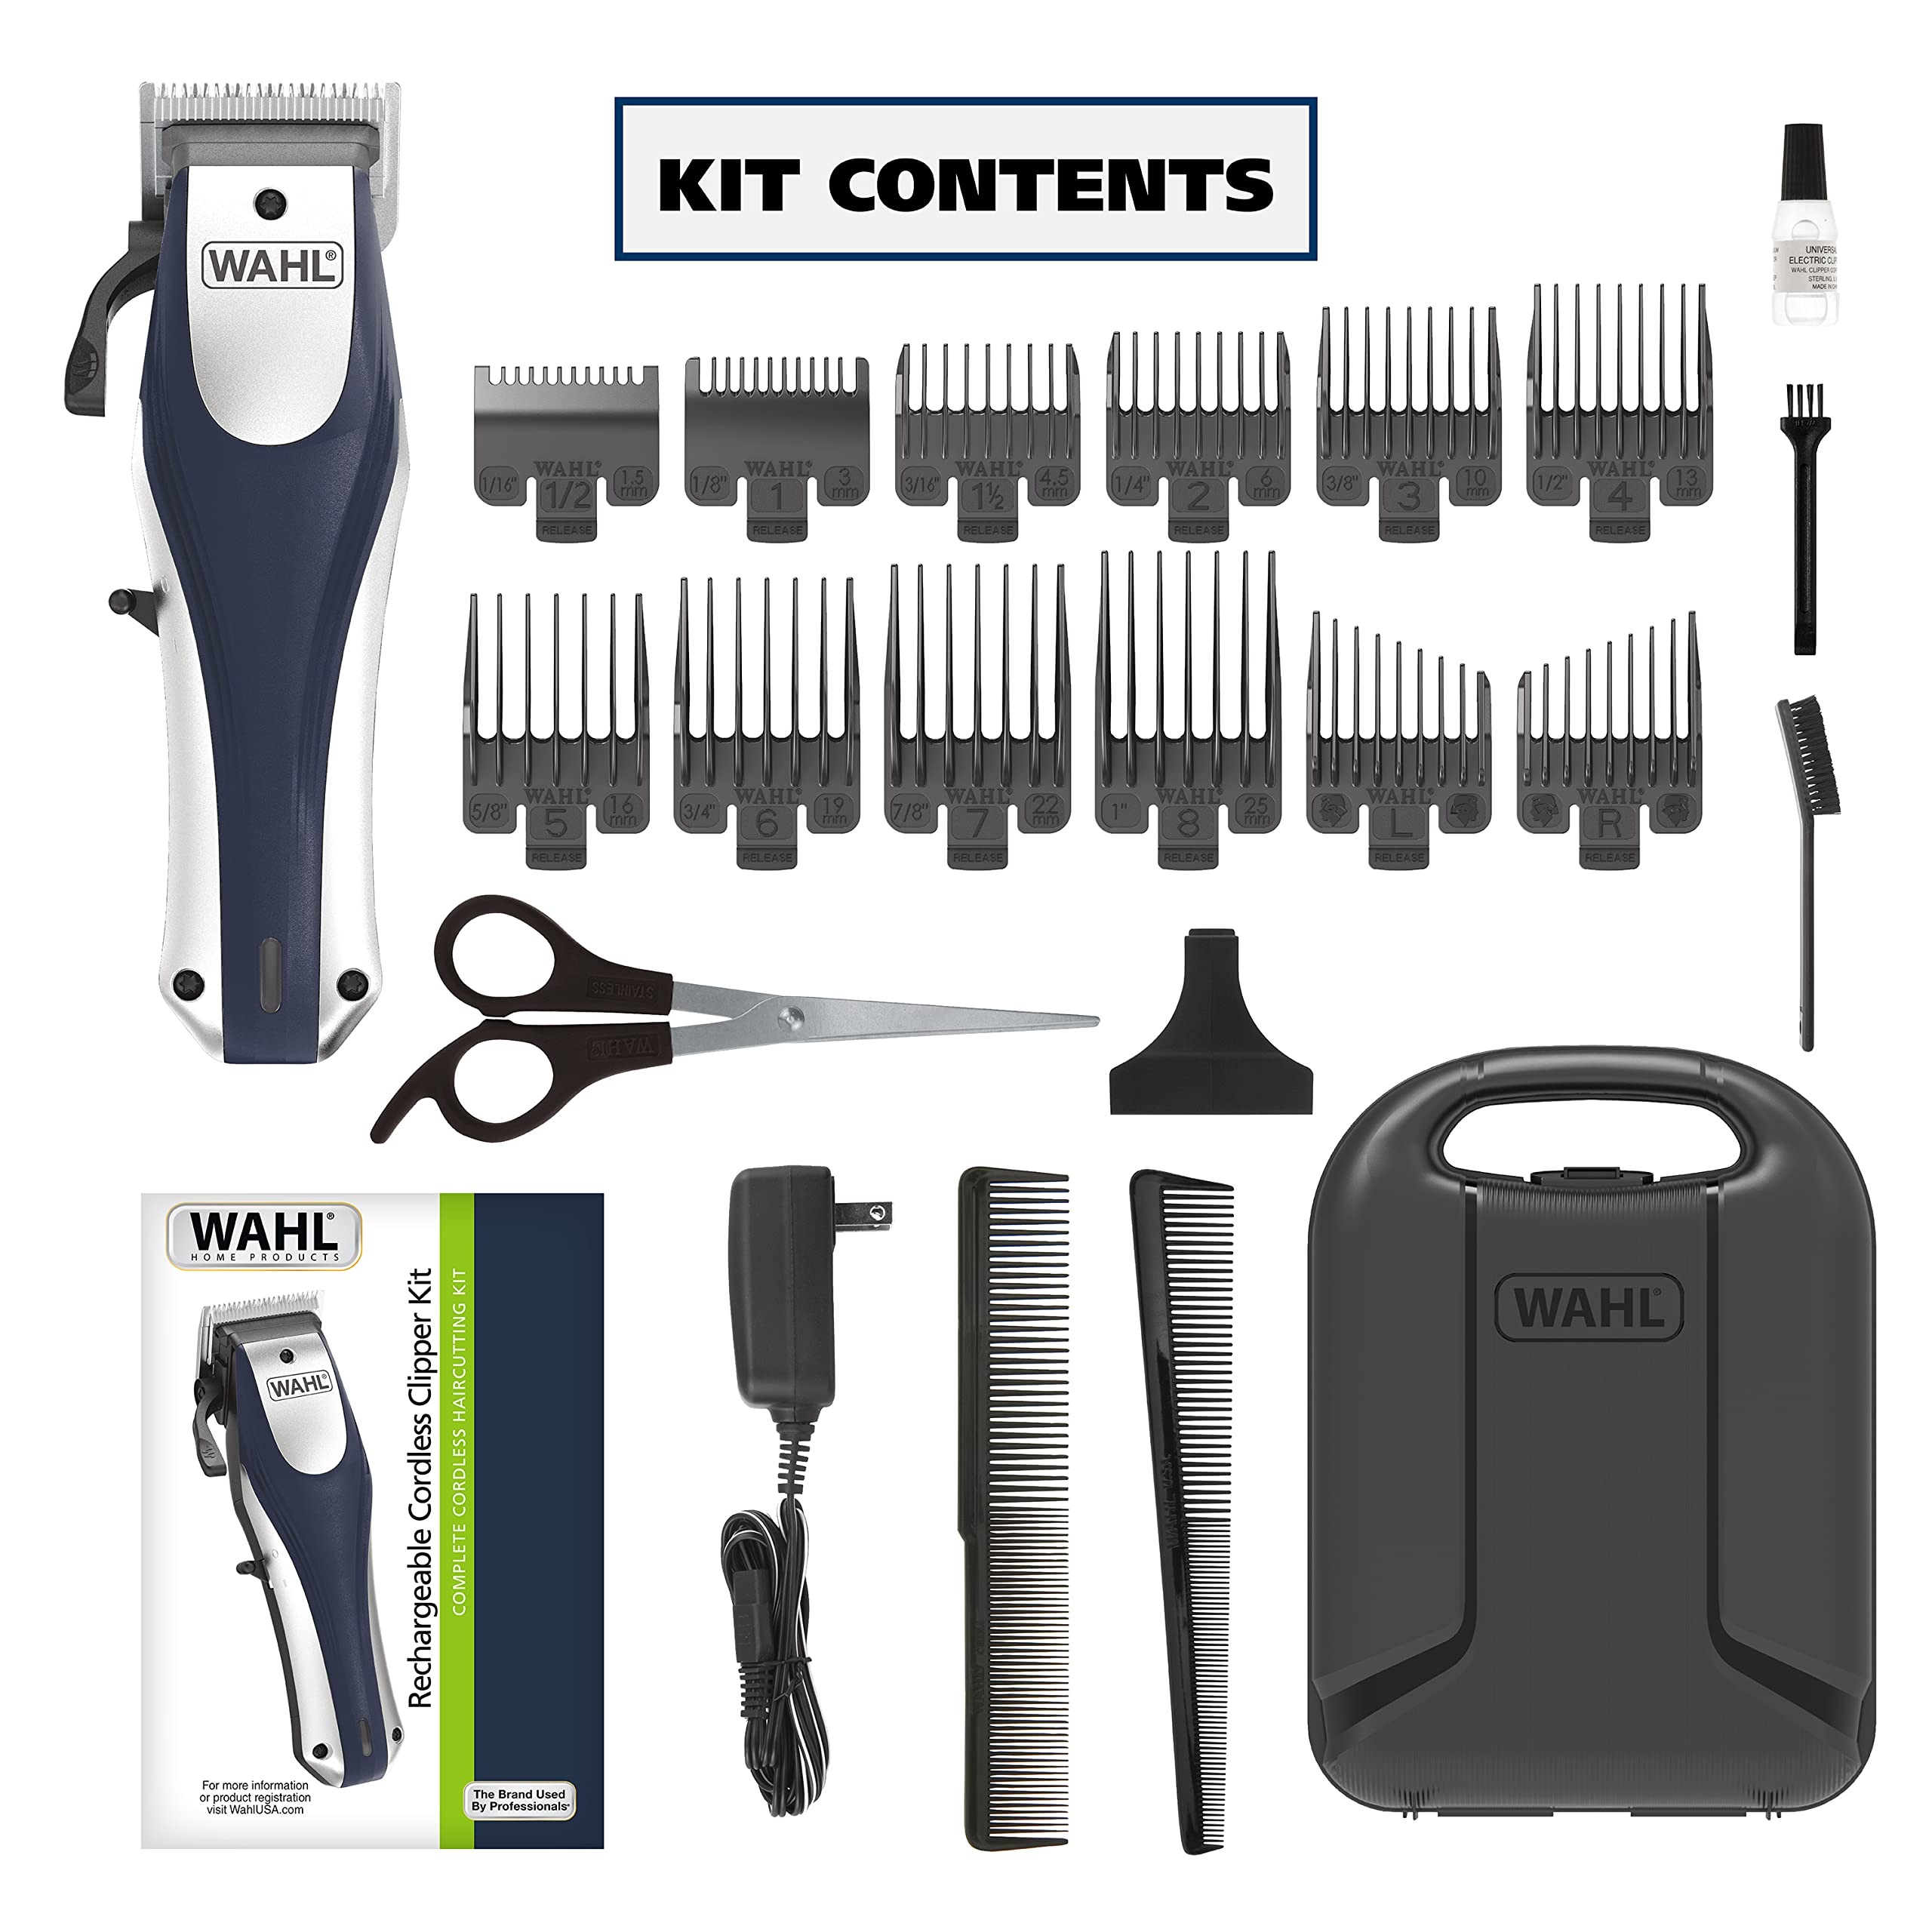 Wahl Lithium Ion Pro Rechargeable Cord/Cordless Hair Clipper Kit for Men, Woman, & Children with Smart Charge Technology for Convenient at Home Haircutting - Model 79470